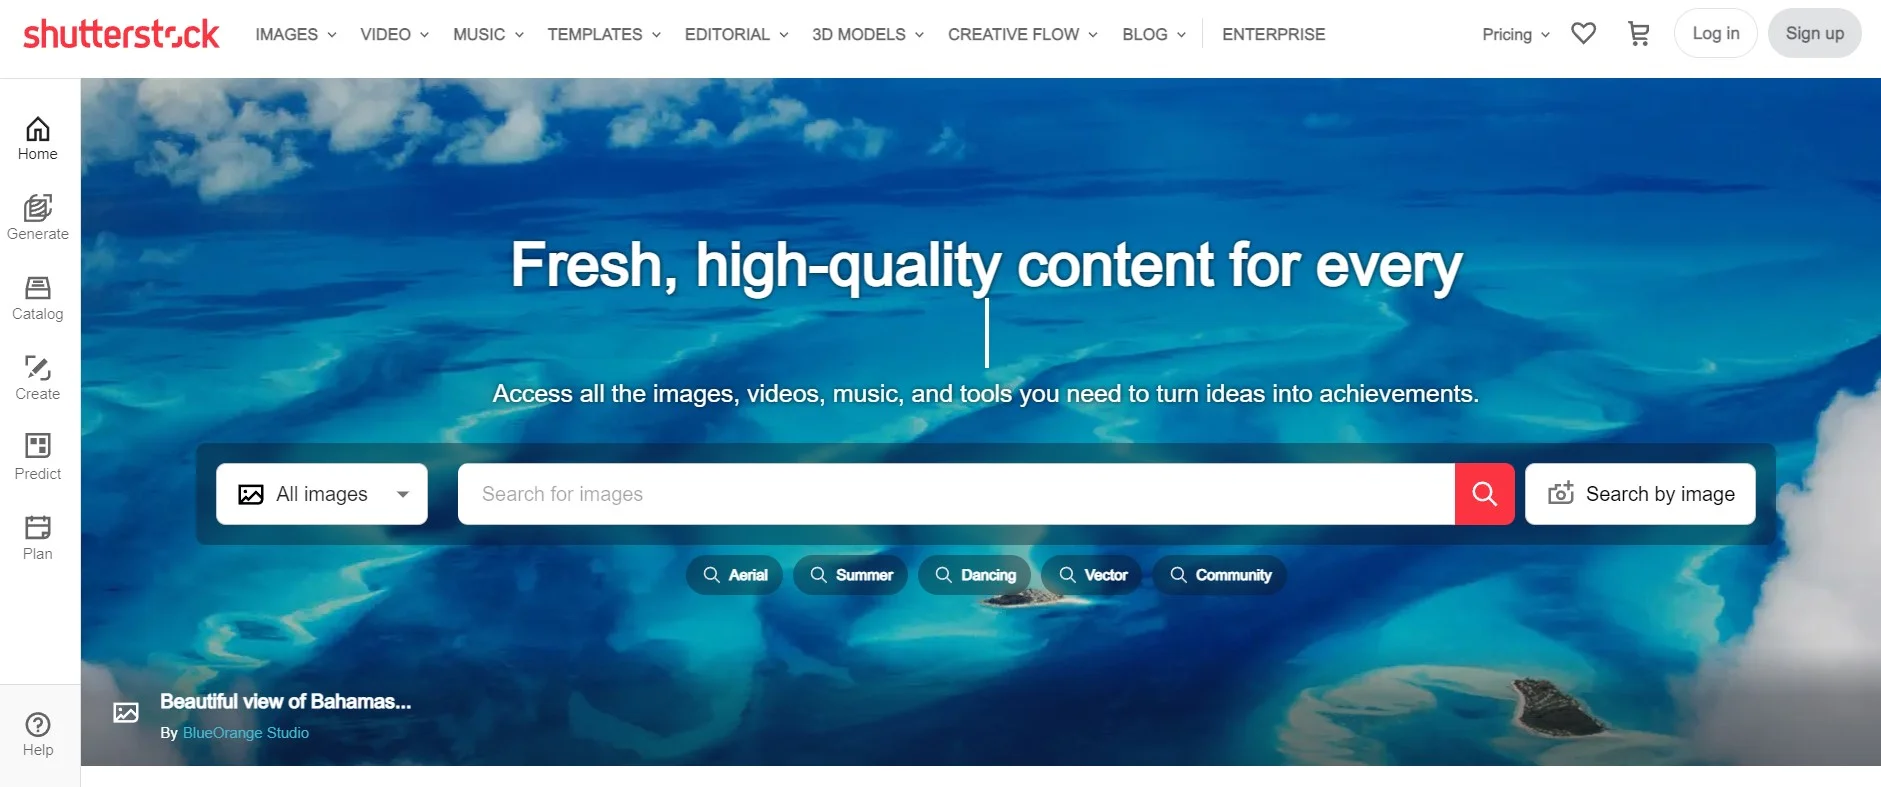 Shutterstock fresh, high-quality content for every business